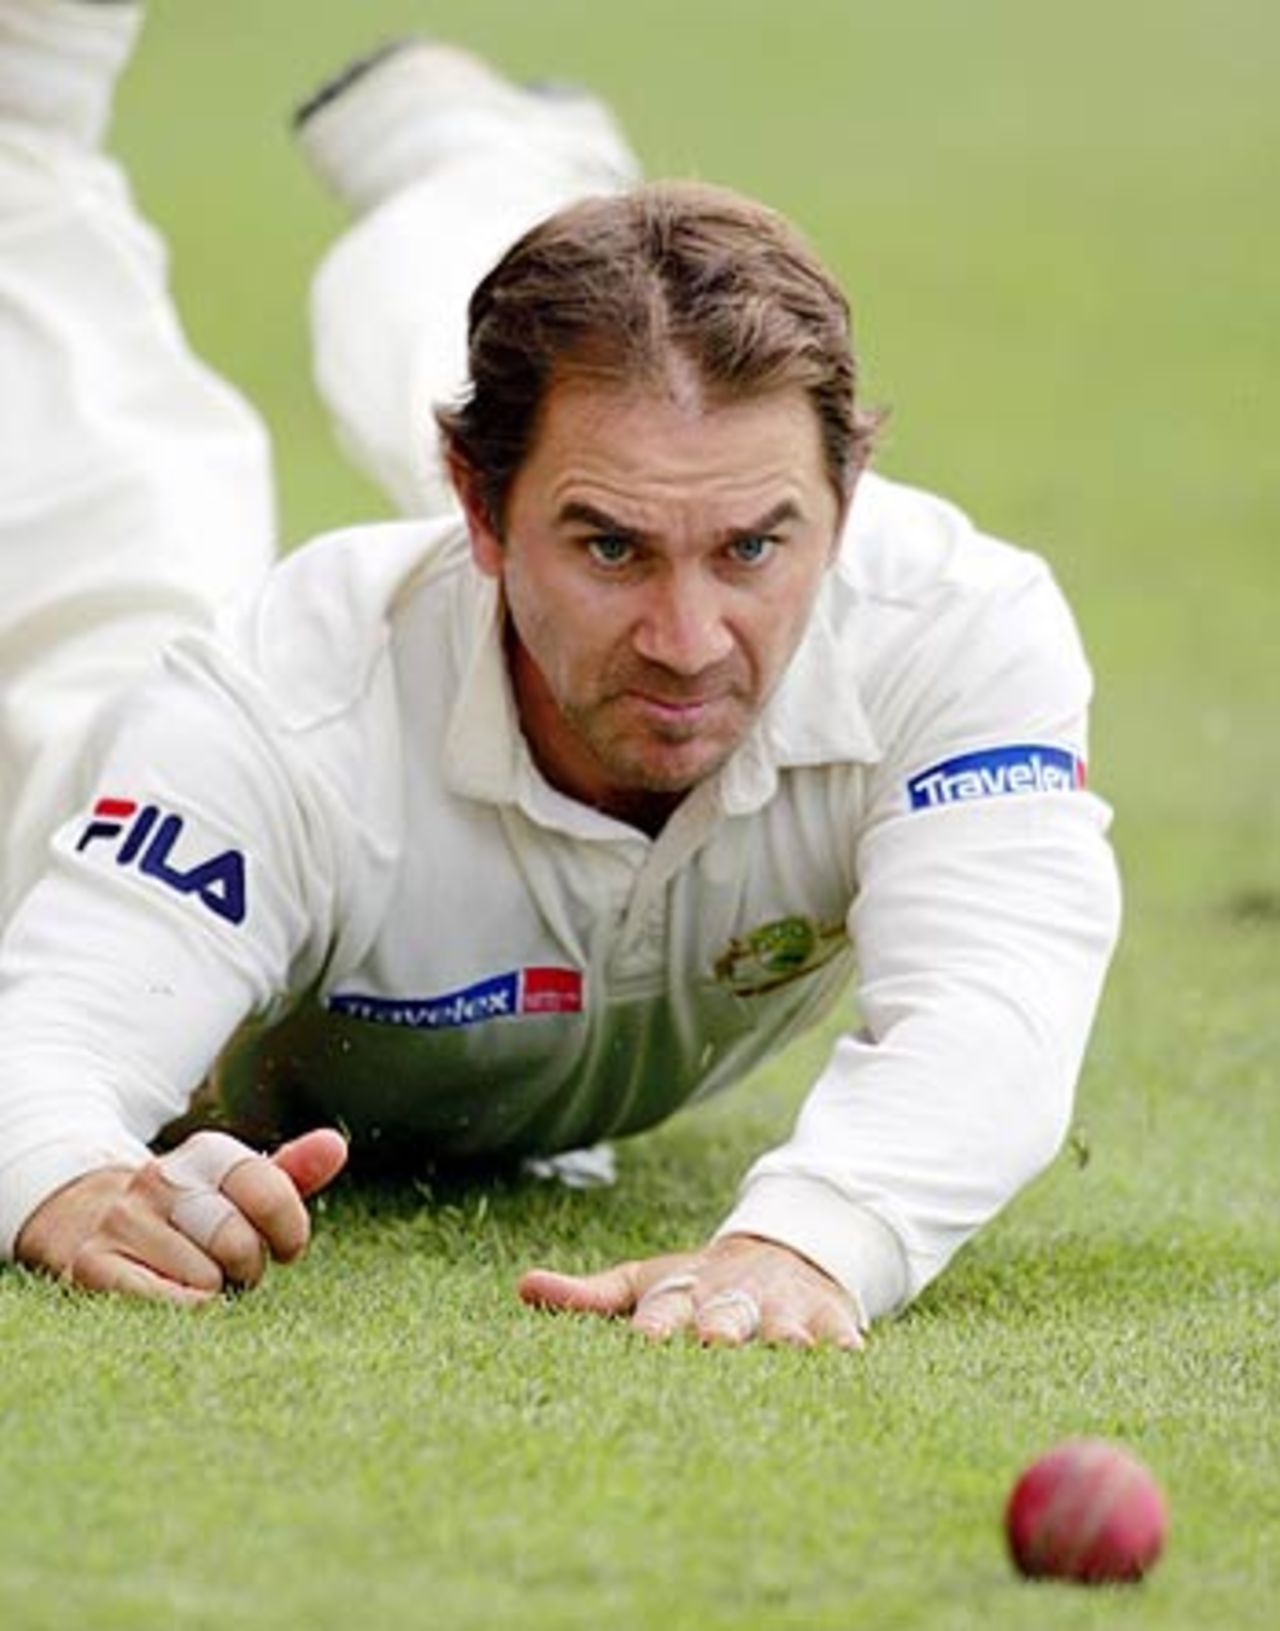 Justin Langer makes a desperate dive to stop a boundary, New Zealand v Australia, 3rd Test, Auckland, 4th day, March 29, 2005